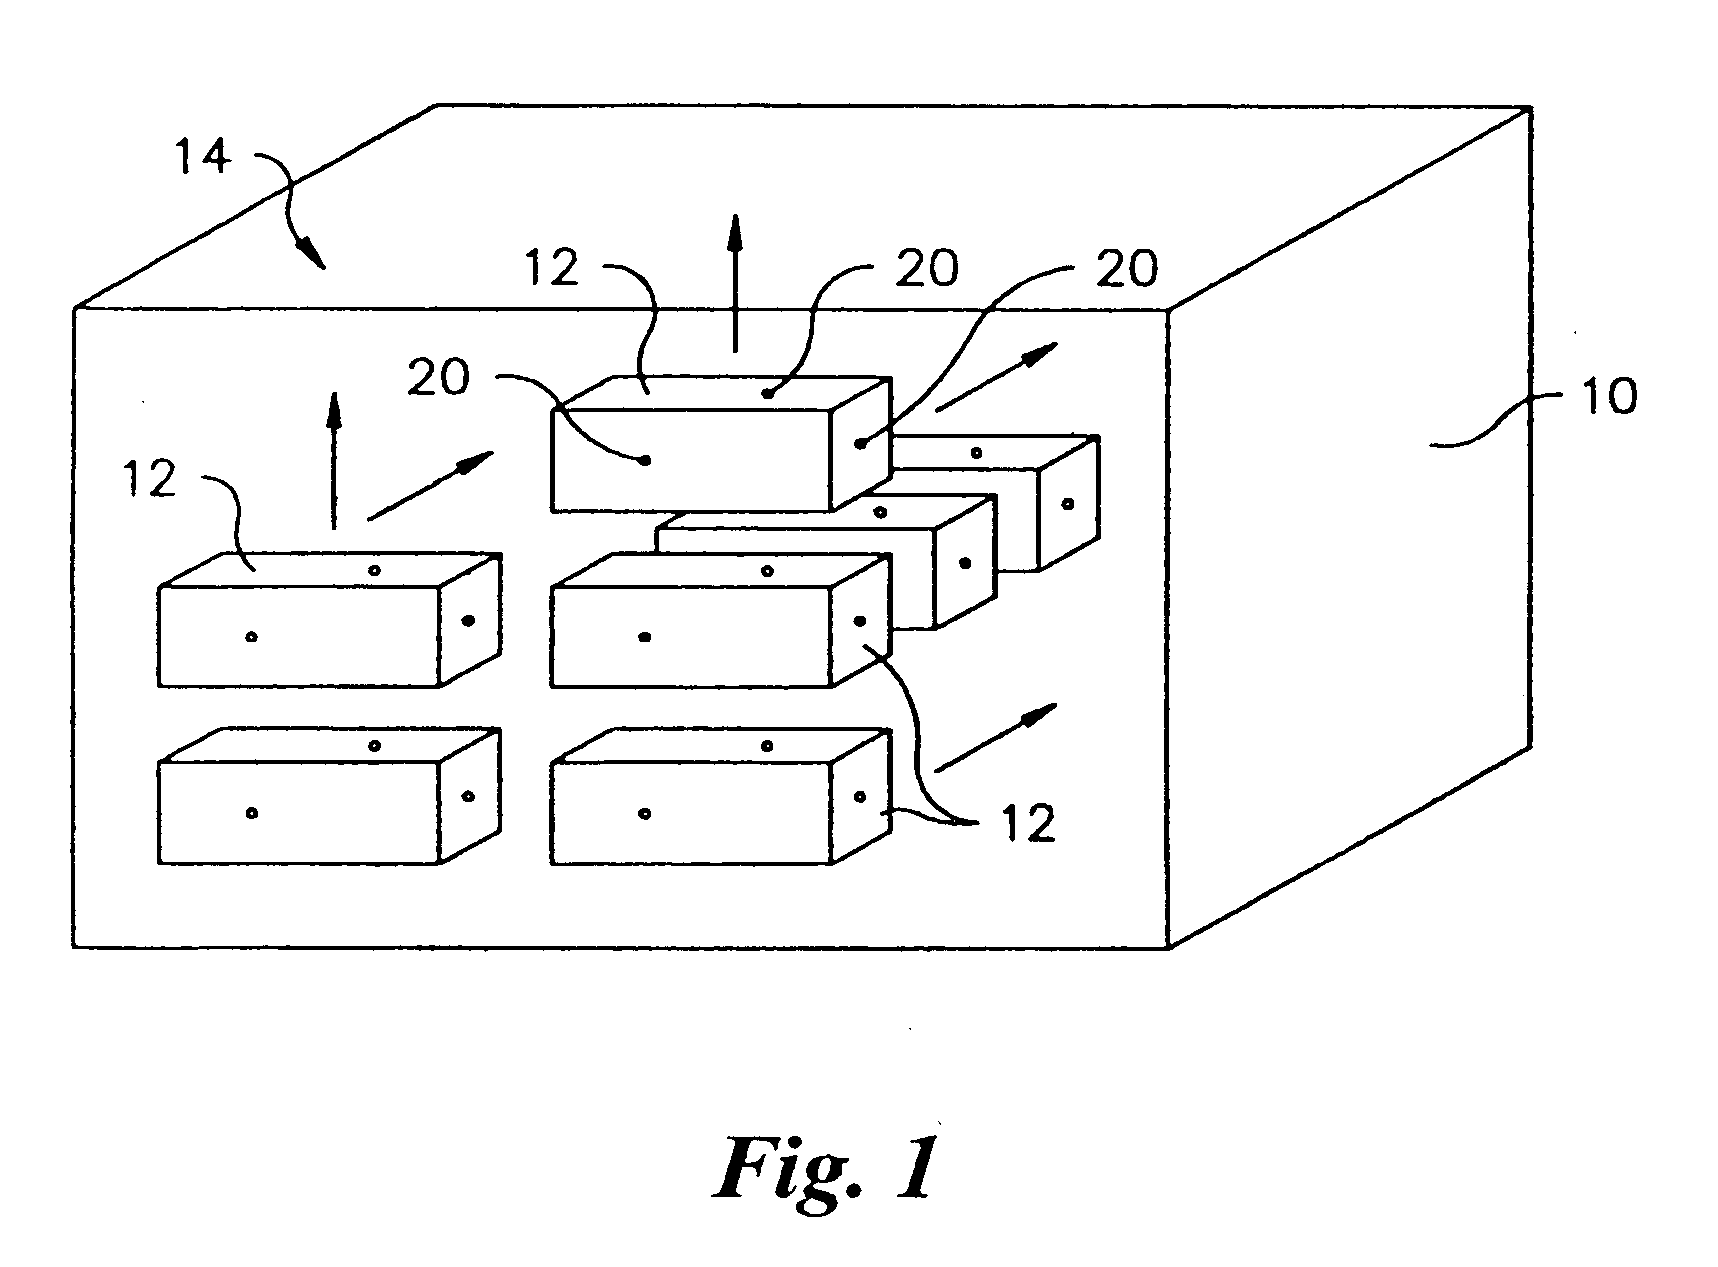 Apparatus and method for asynchronously analyzing data to detect radioactive material